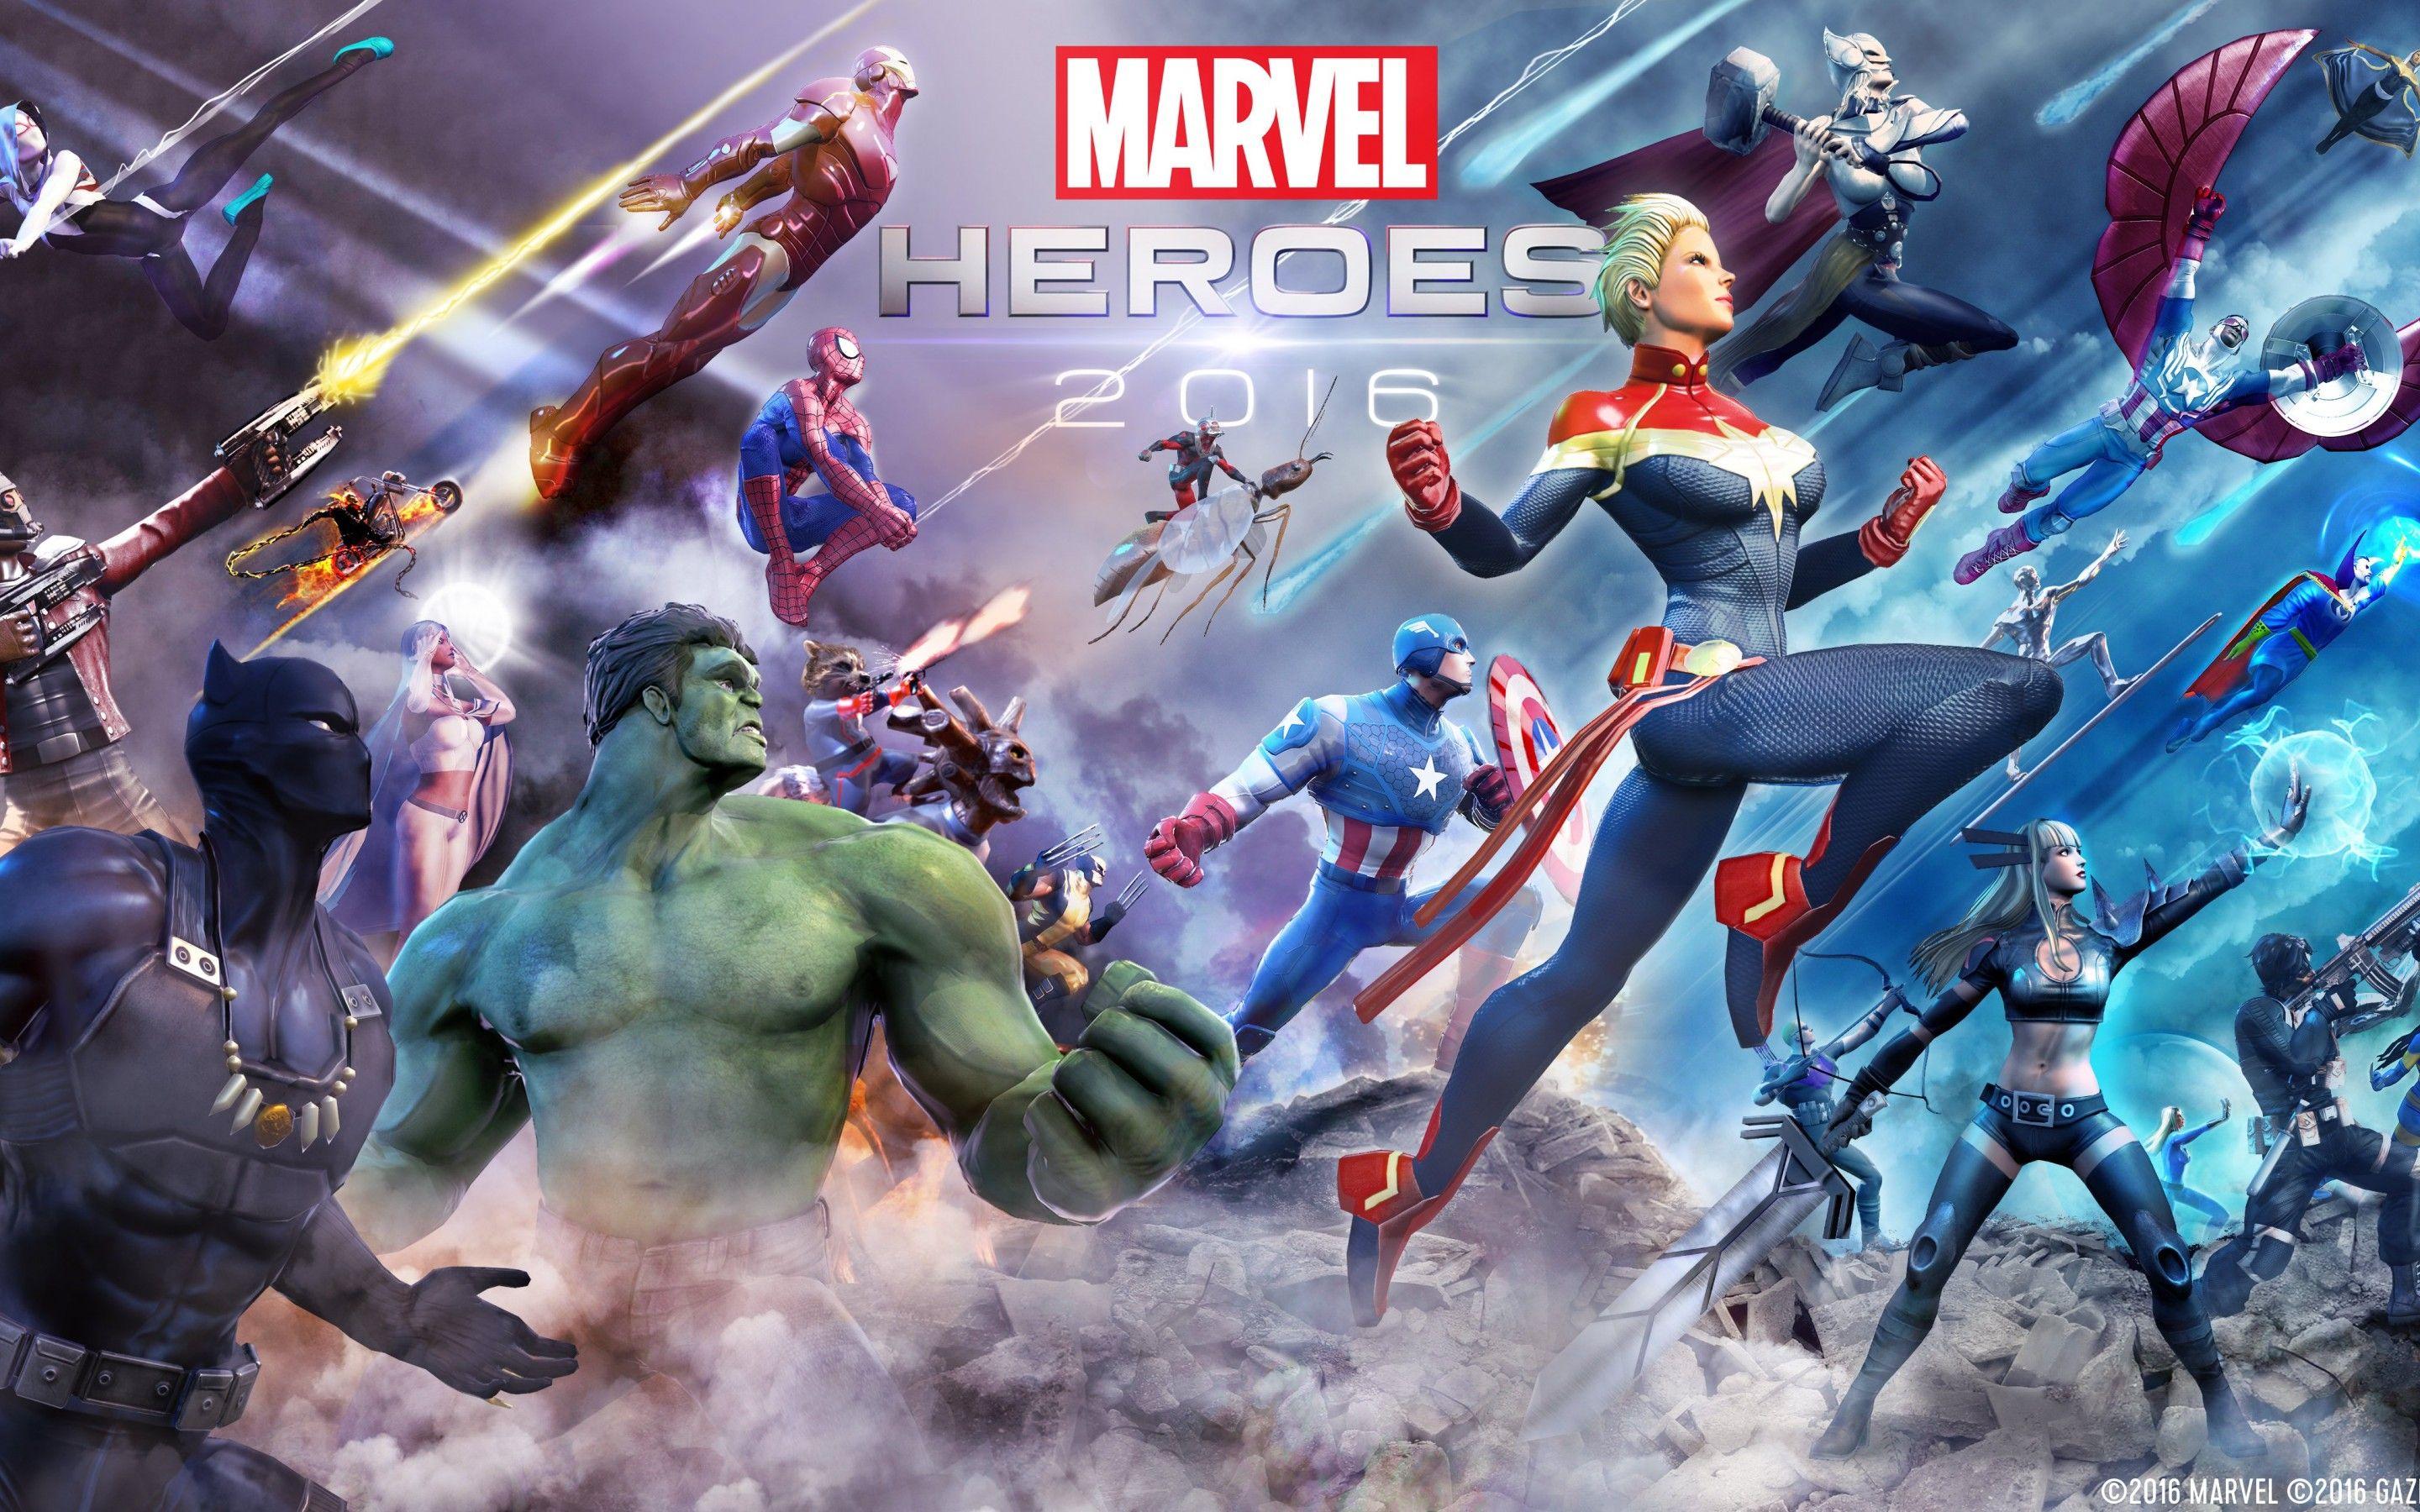 Wallpaper Marvel Heroes Avengers, Guardians of the Galaxy, X